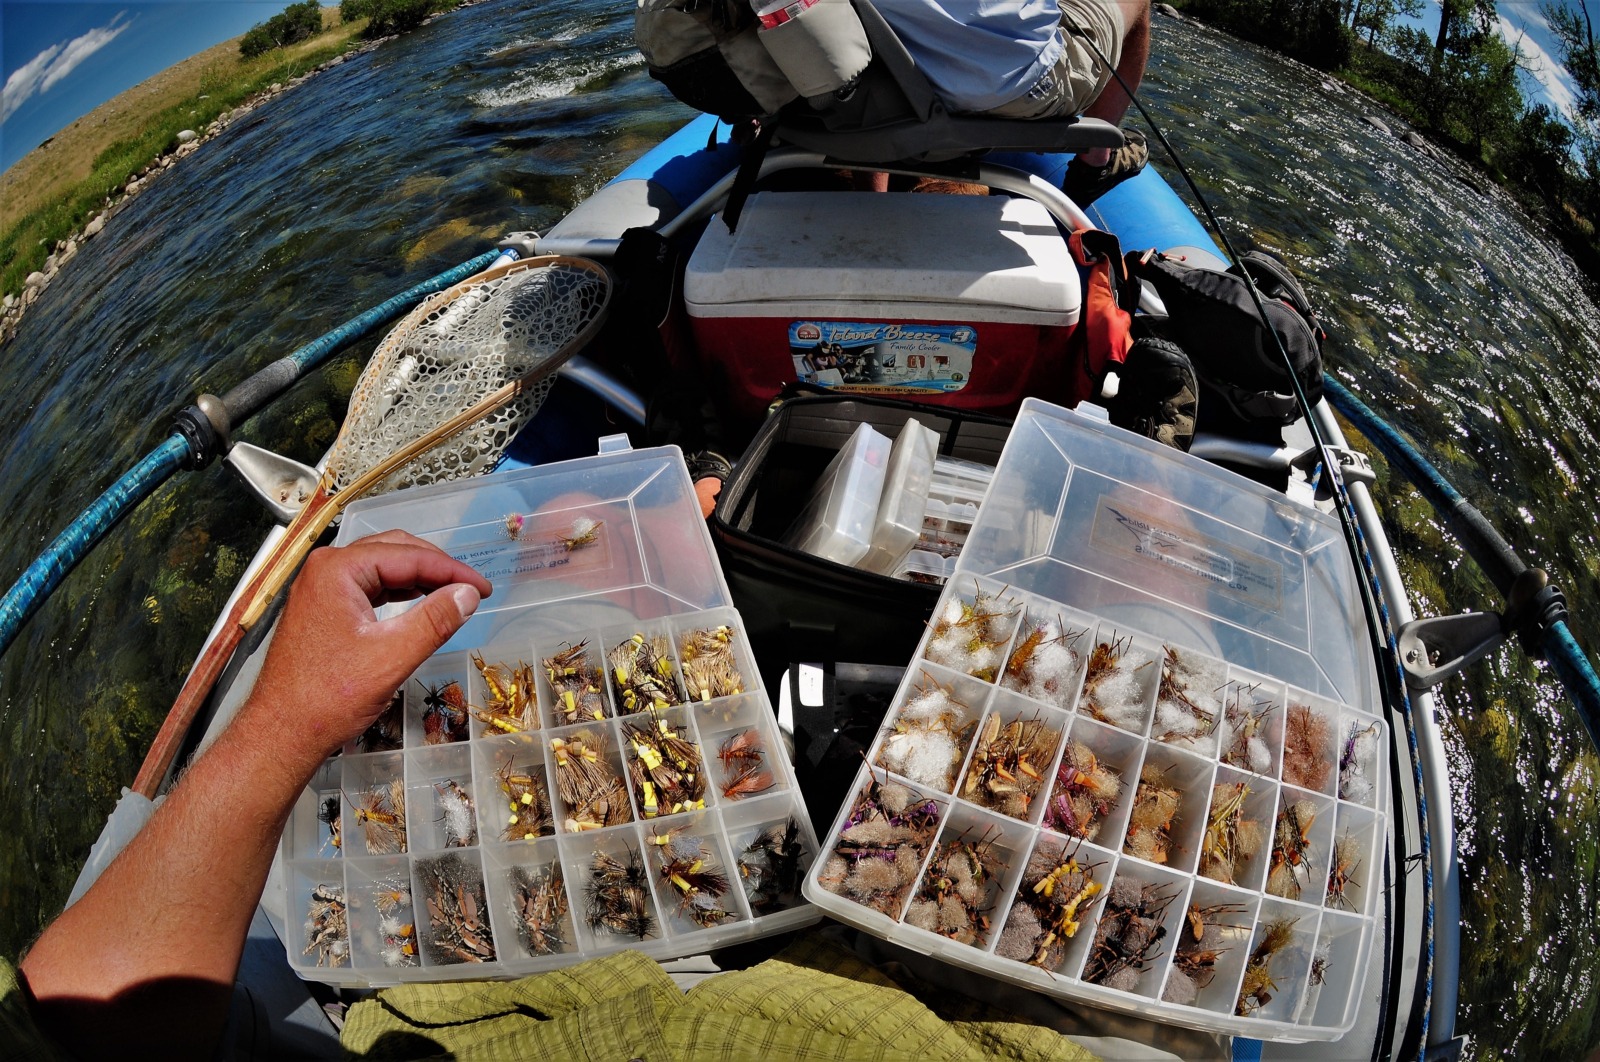 Decisions, decisions. Chad ponders which fly to choose next on Montana's Stillwater River